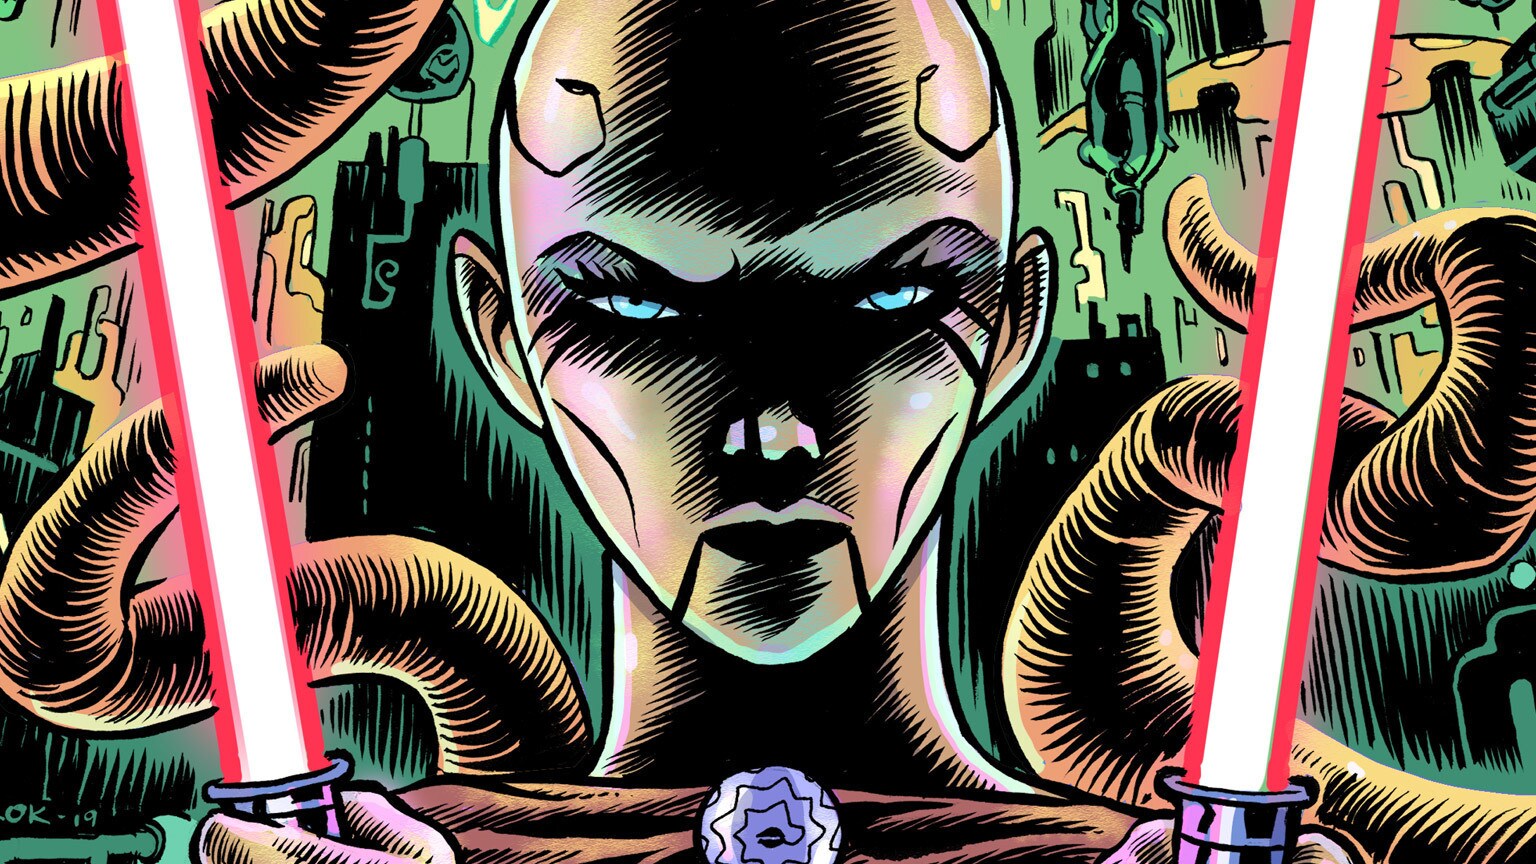 Return to Vader’s Castle #3 Gets Witchy with Asajj Ventress - Exclusive Preview